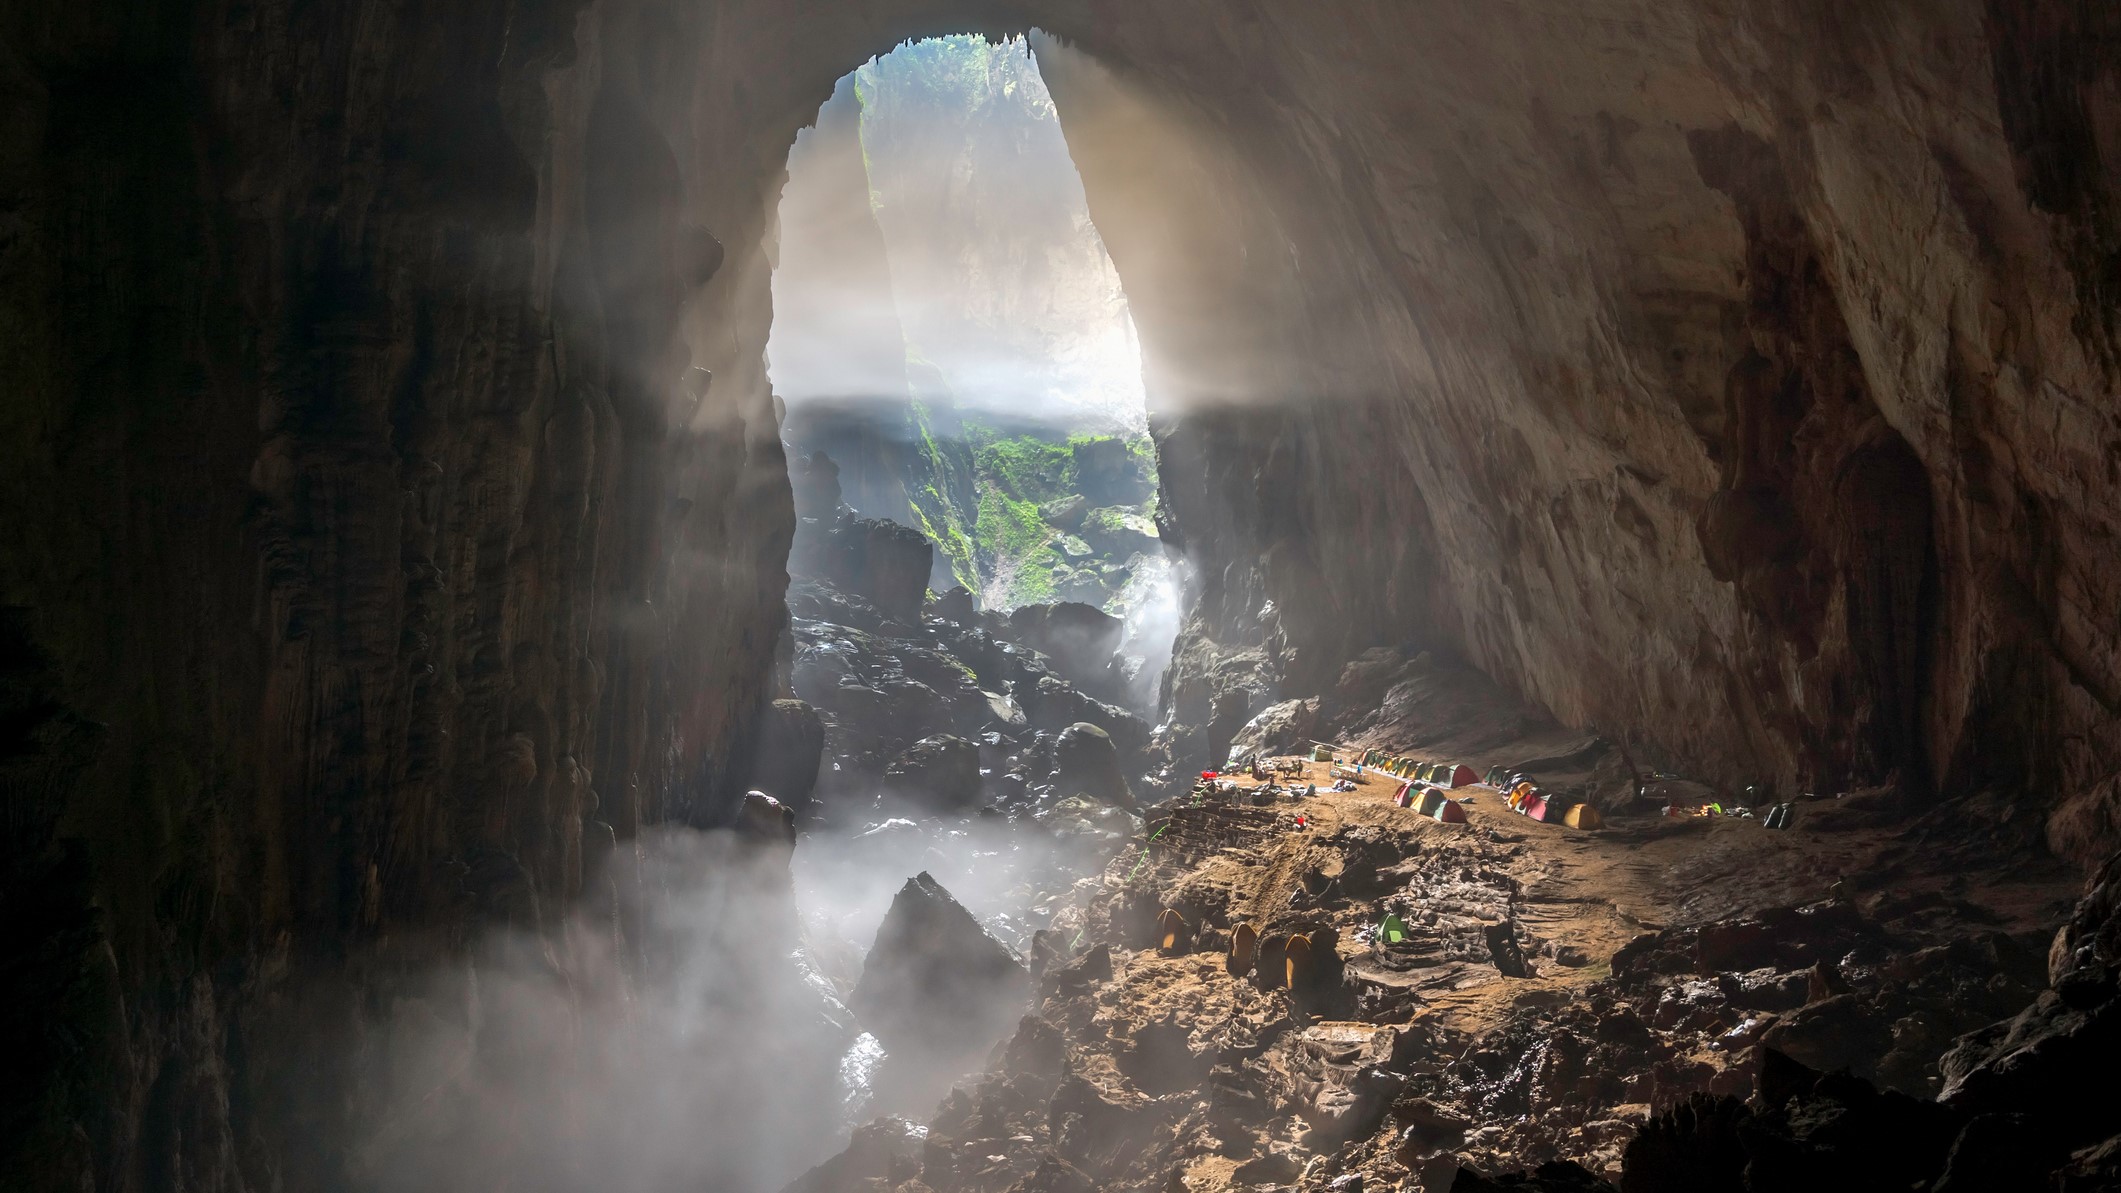 Inside a large cave with light filtering in through the entrance. Clouds are forming within the cave.